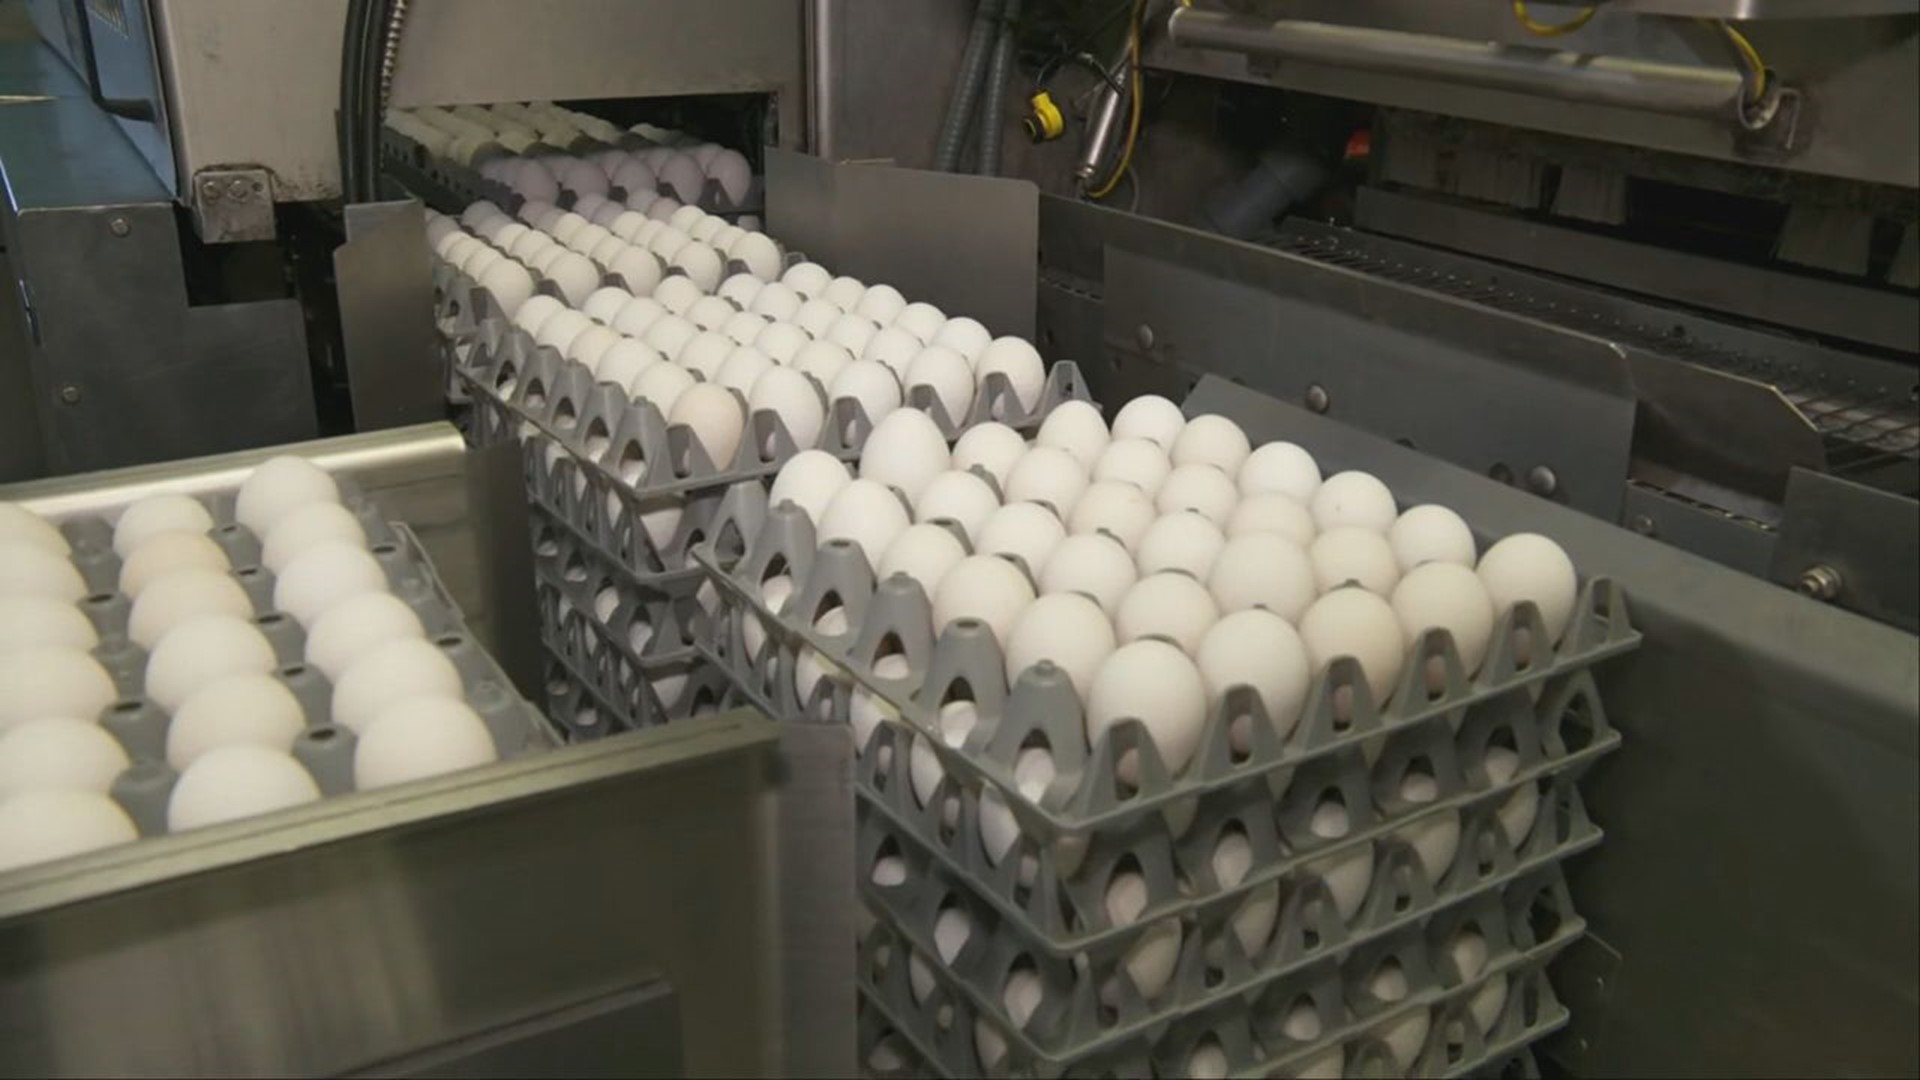 USDA data shows egg prices are on the decline, but with the ongoing threats of avian flu and inflation, how low they'll go is still unknown.